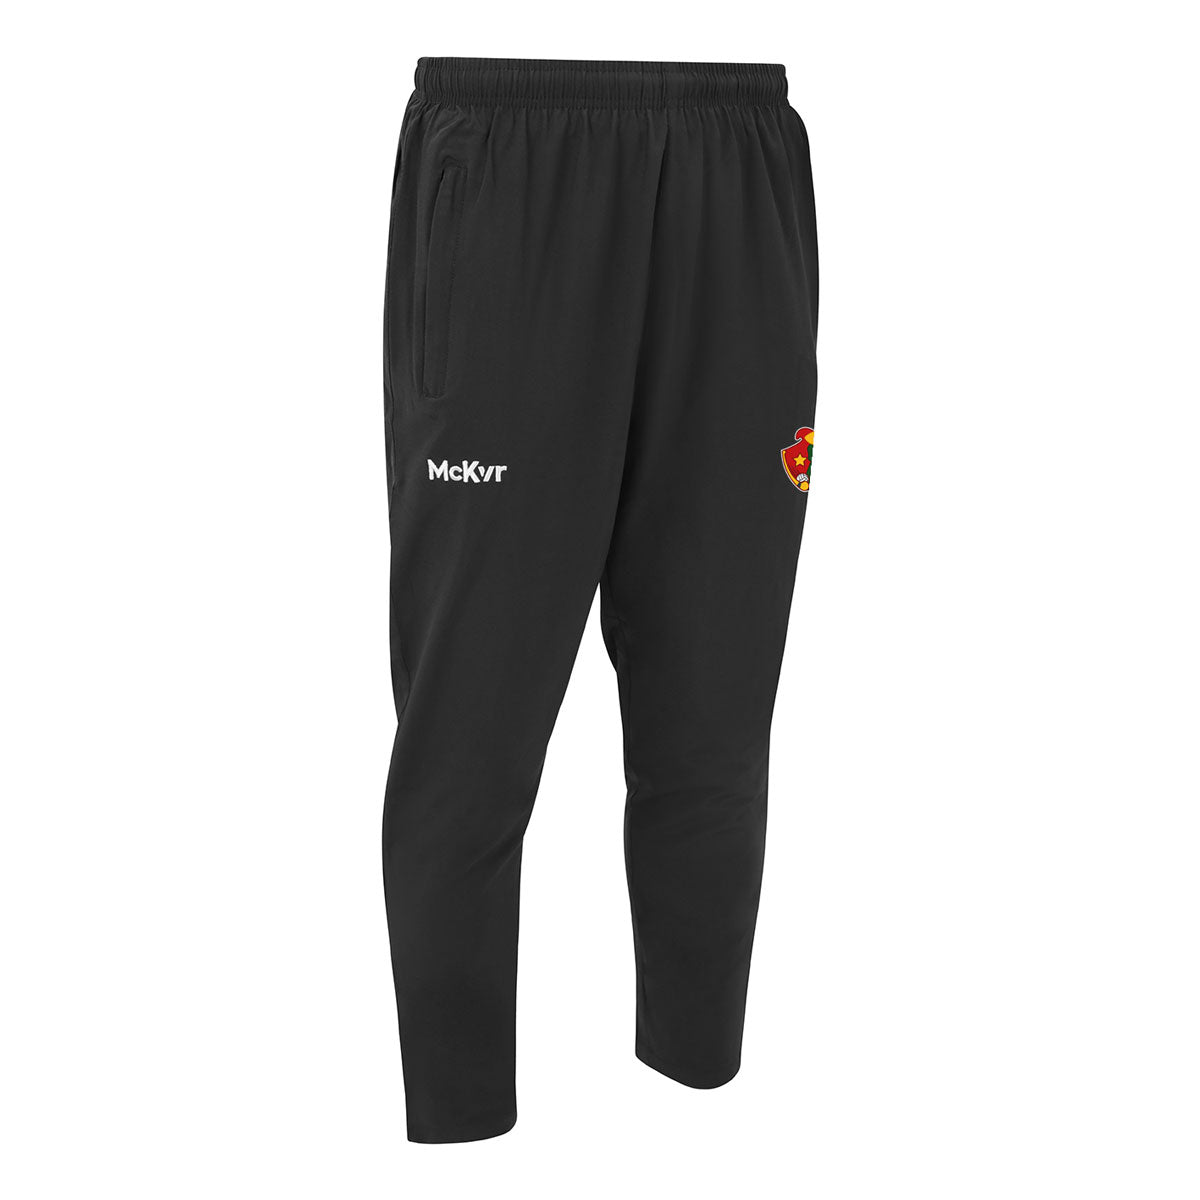 Mc Keever Saigon Gaels Core 22 Tapered Pants - Youth - Black